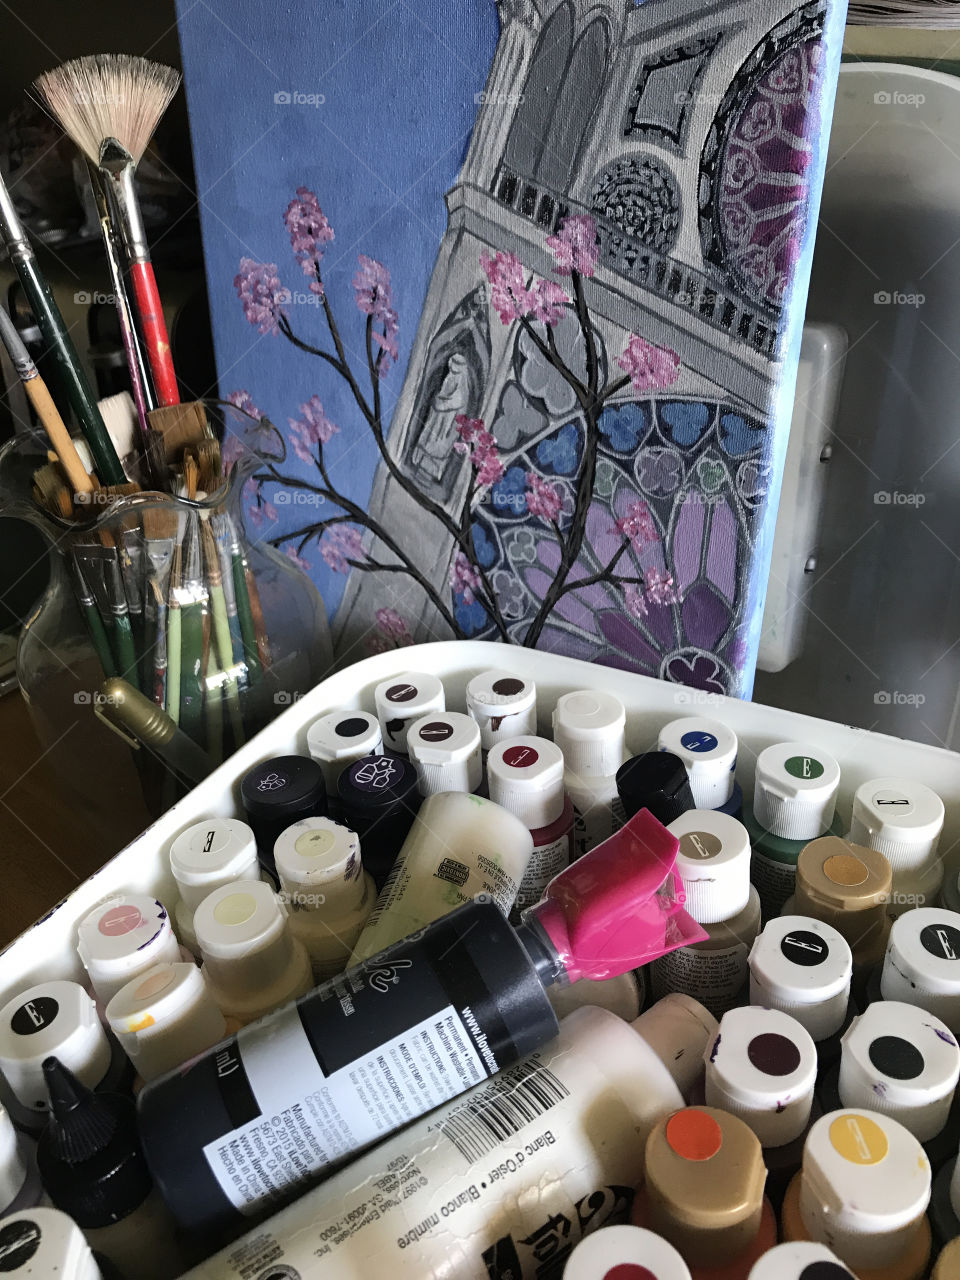 Paints, brushes, and painting